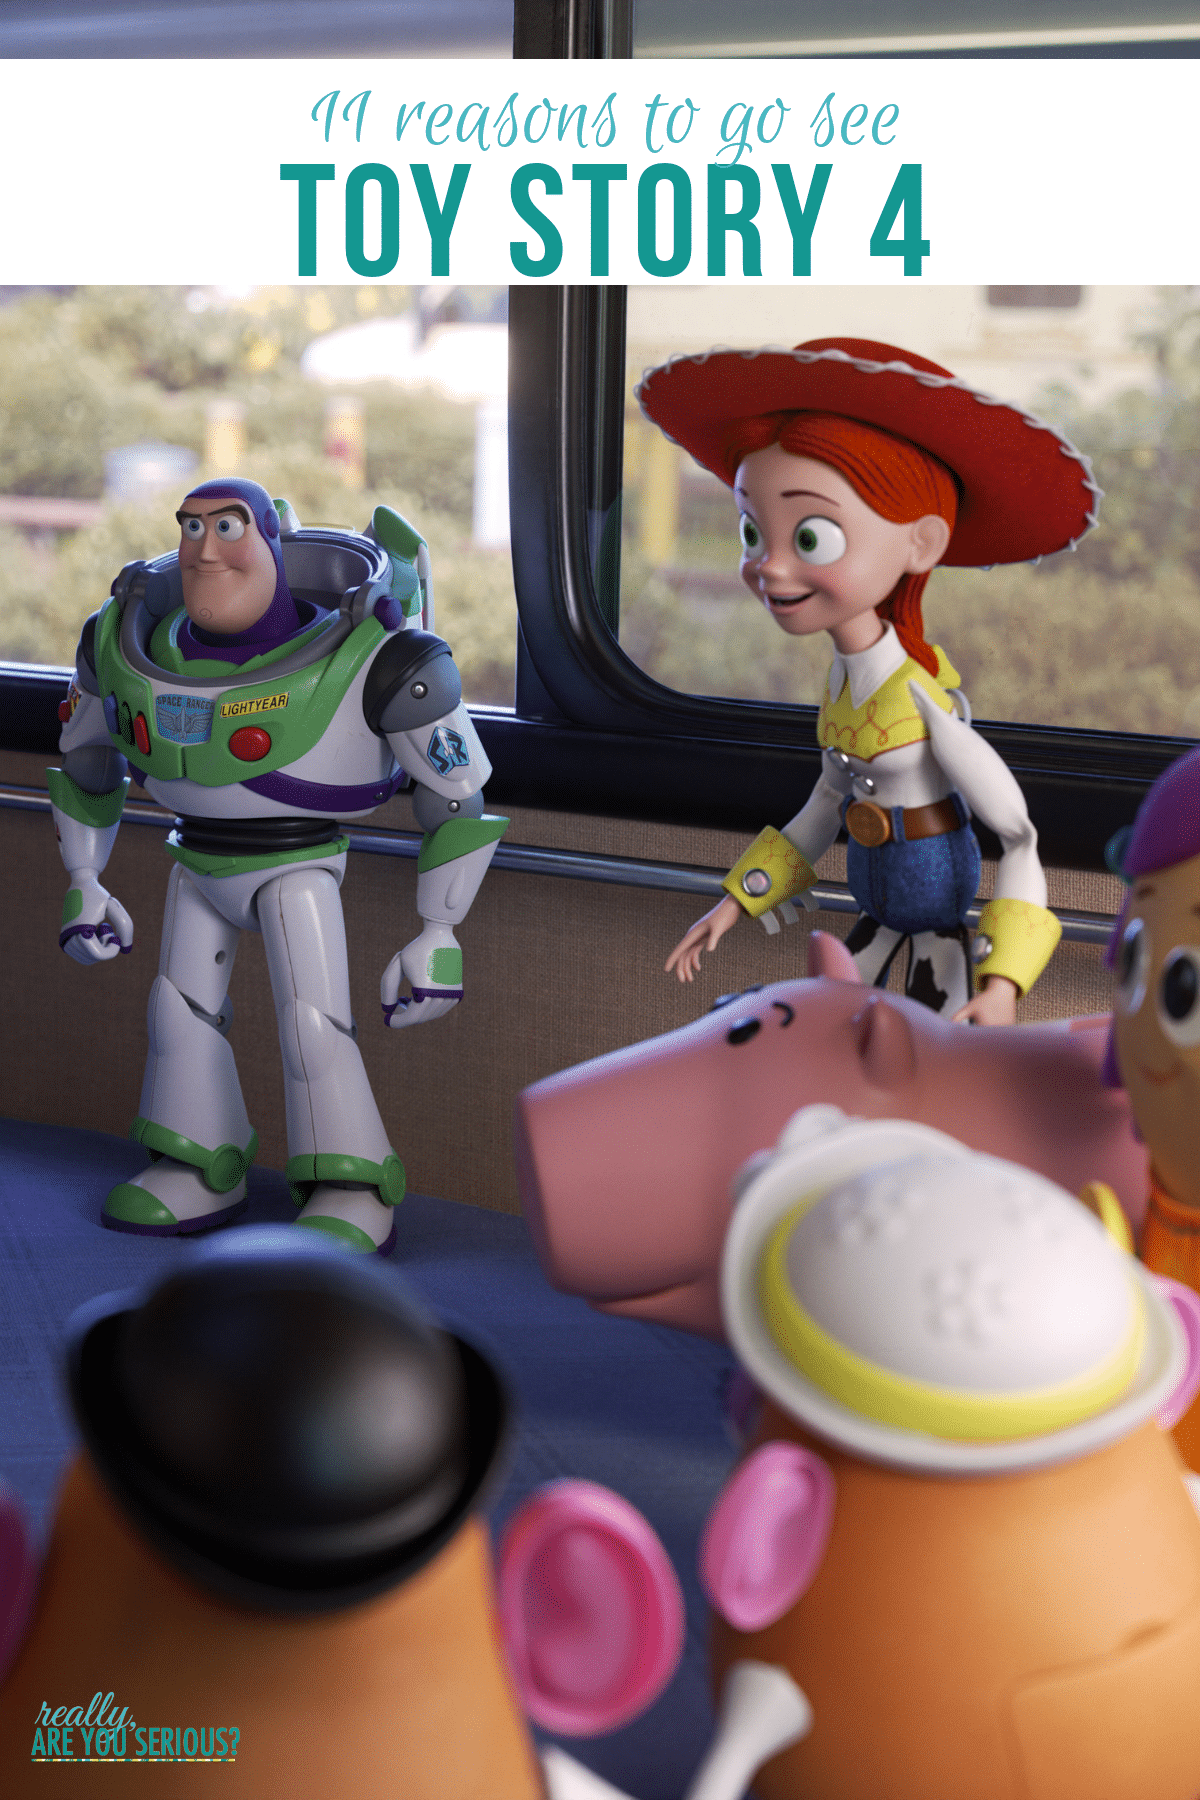 11 reasons to go see Toy Story 4